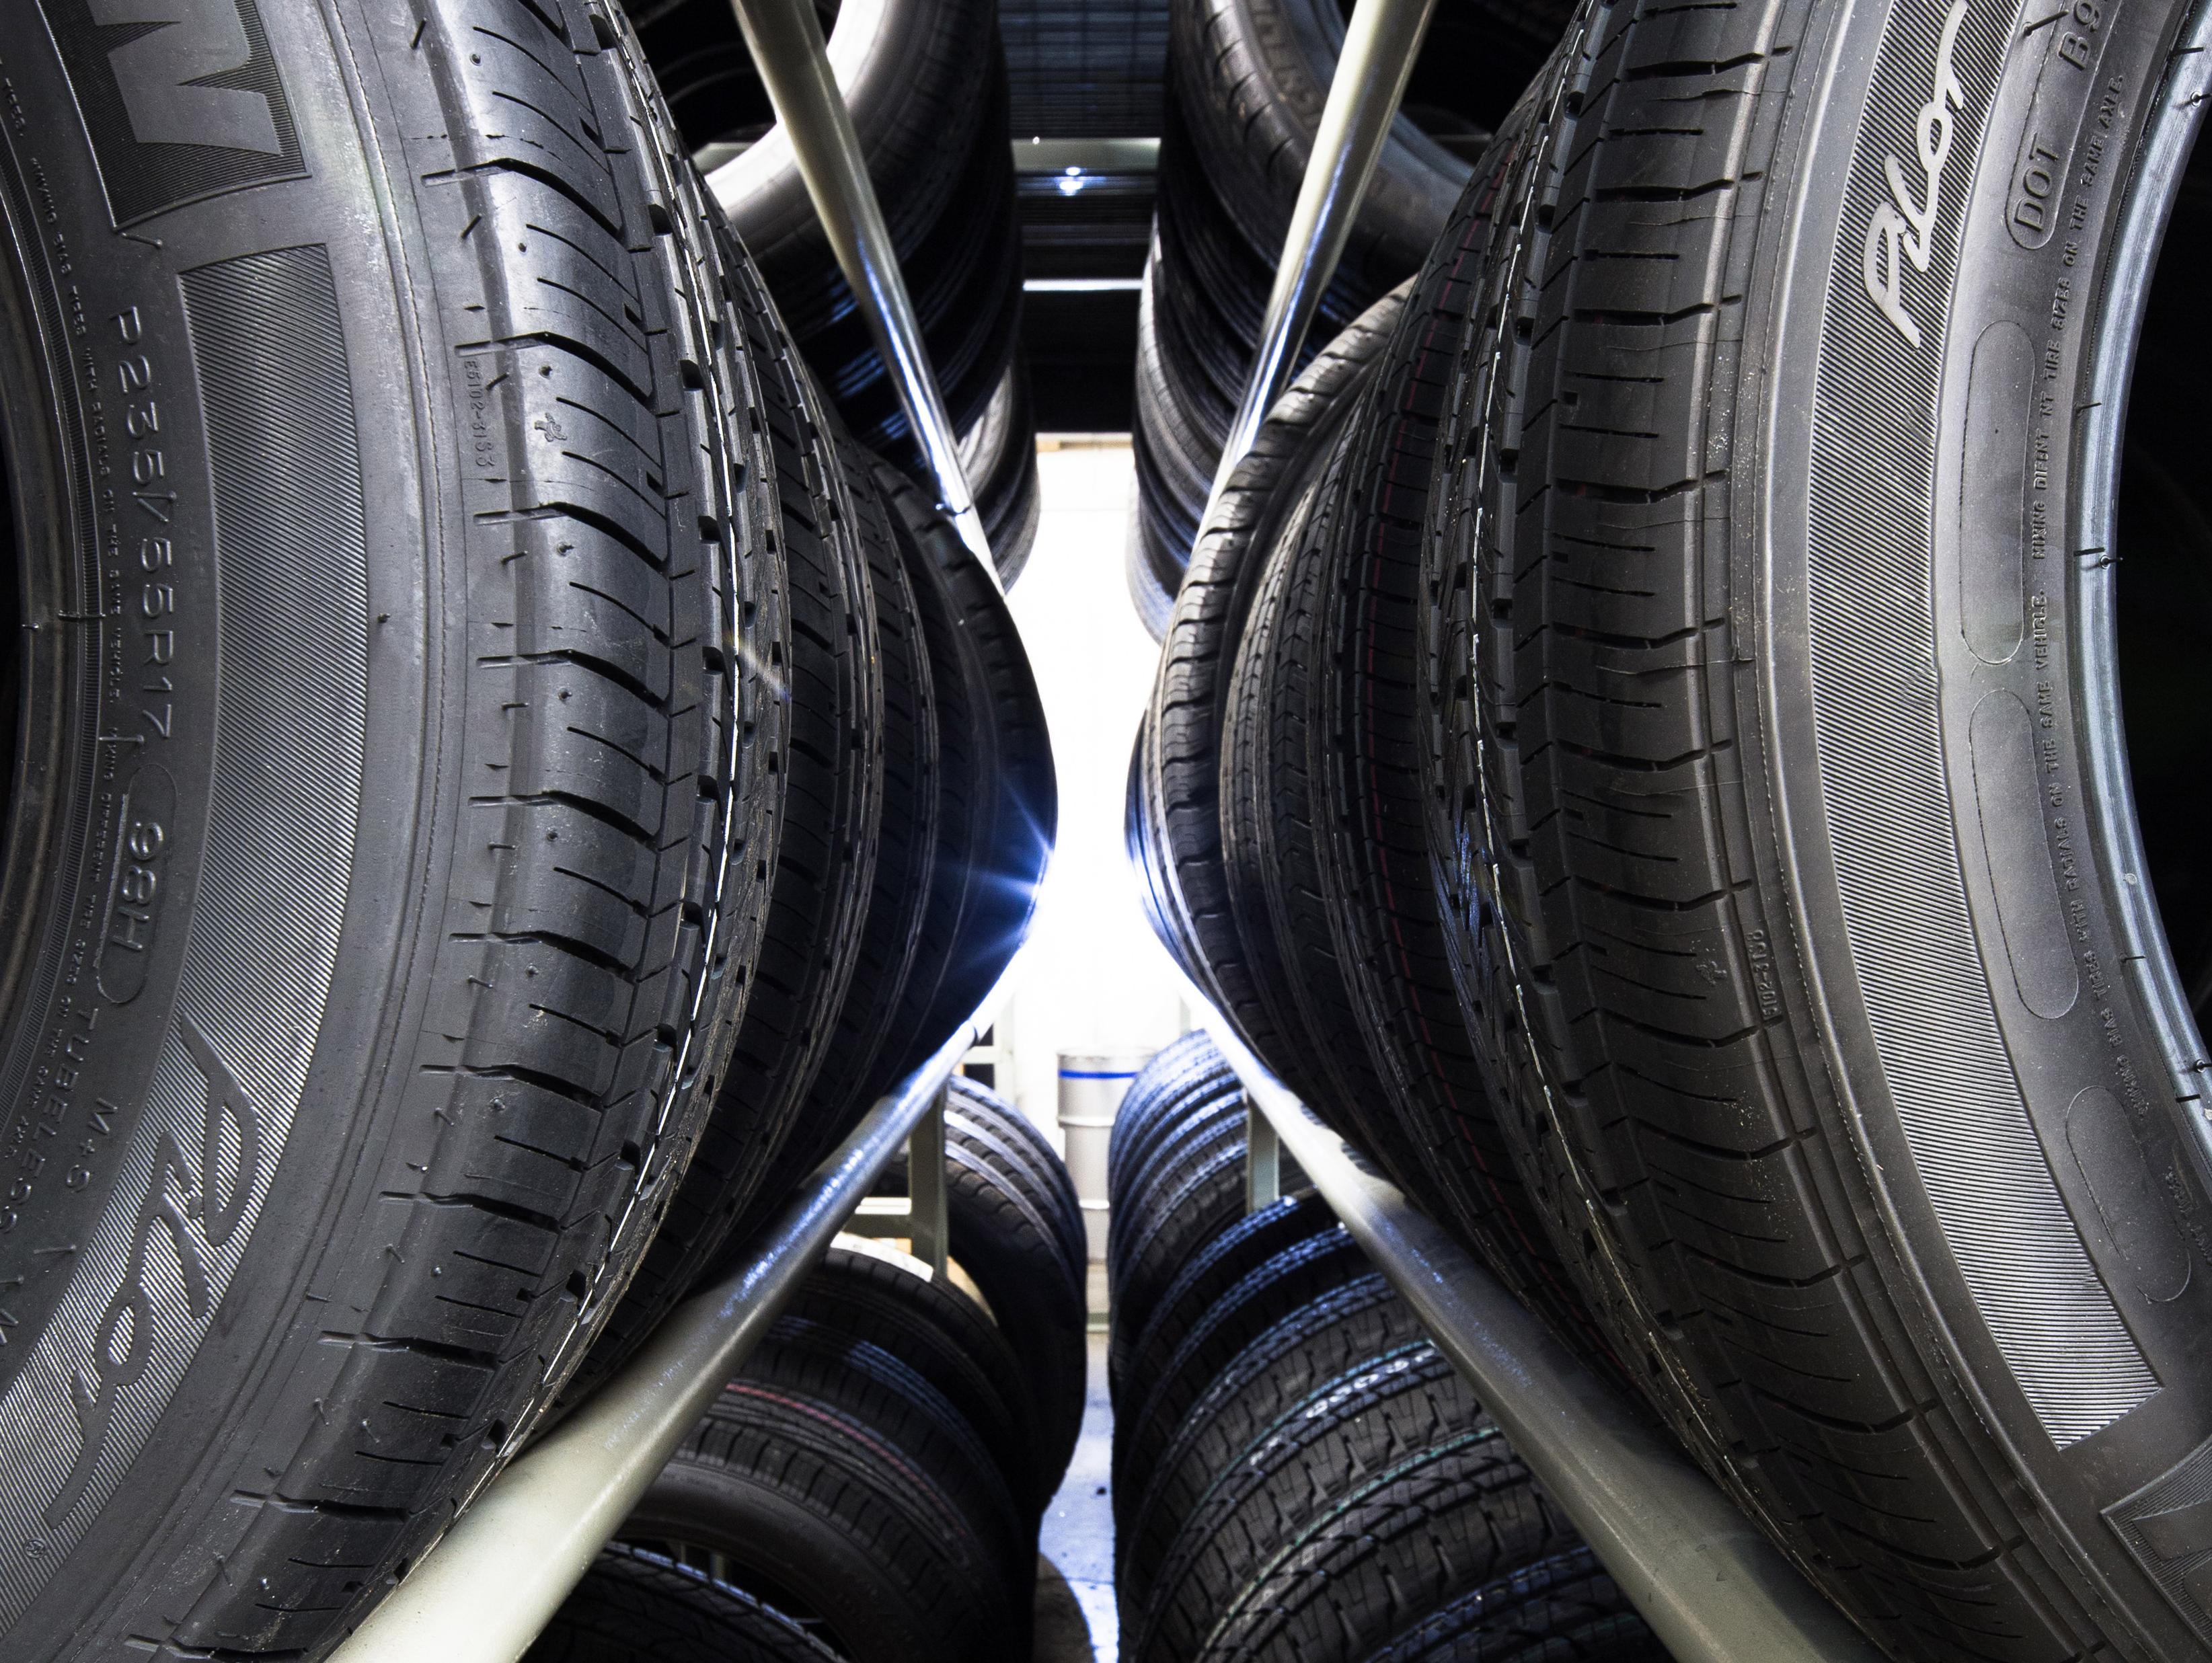 Tire Meaning and Definition